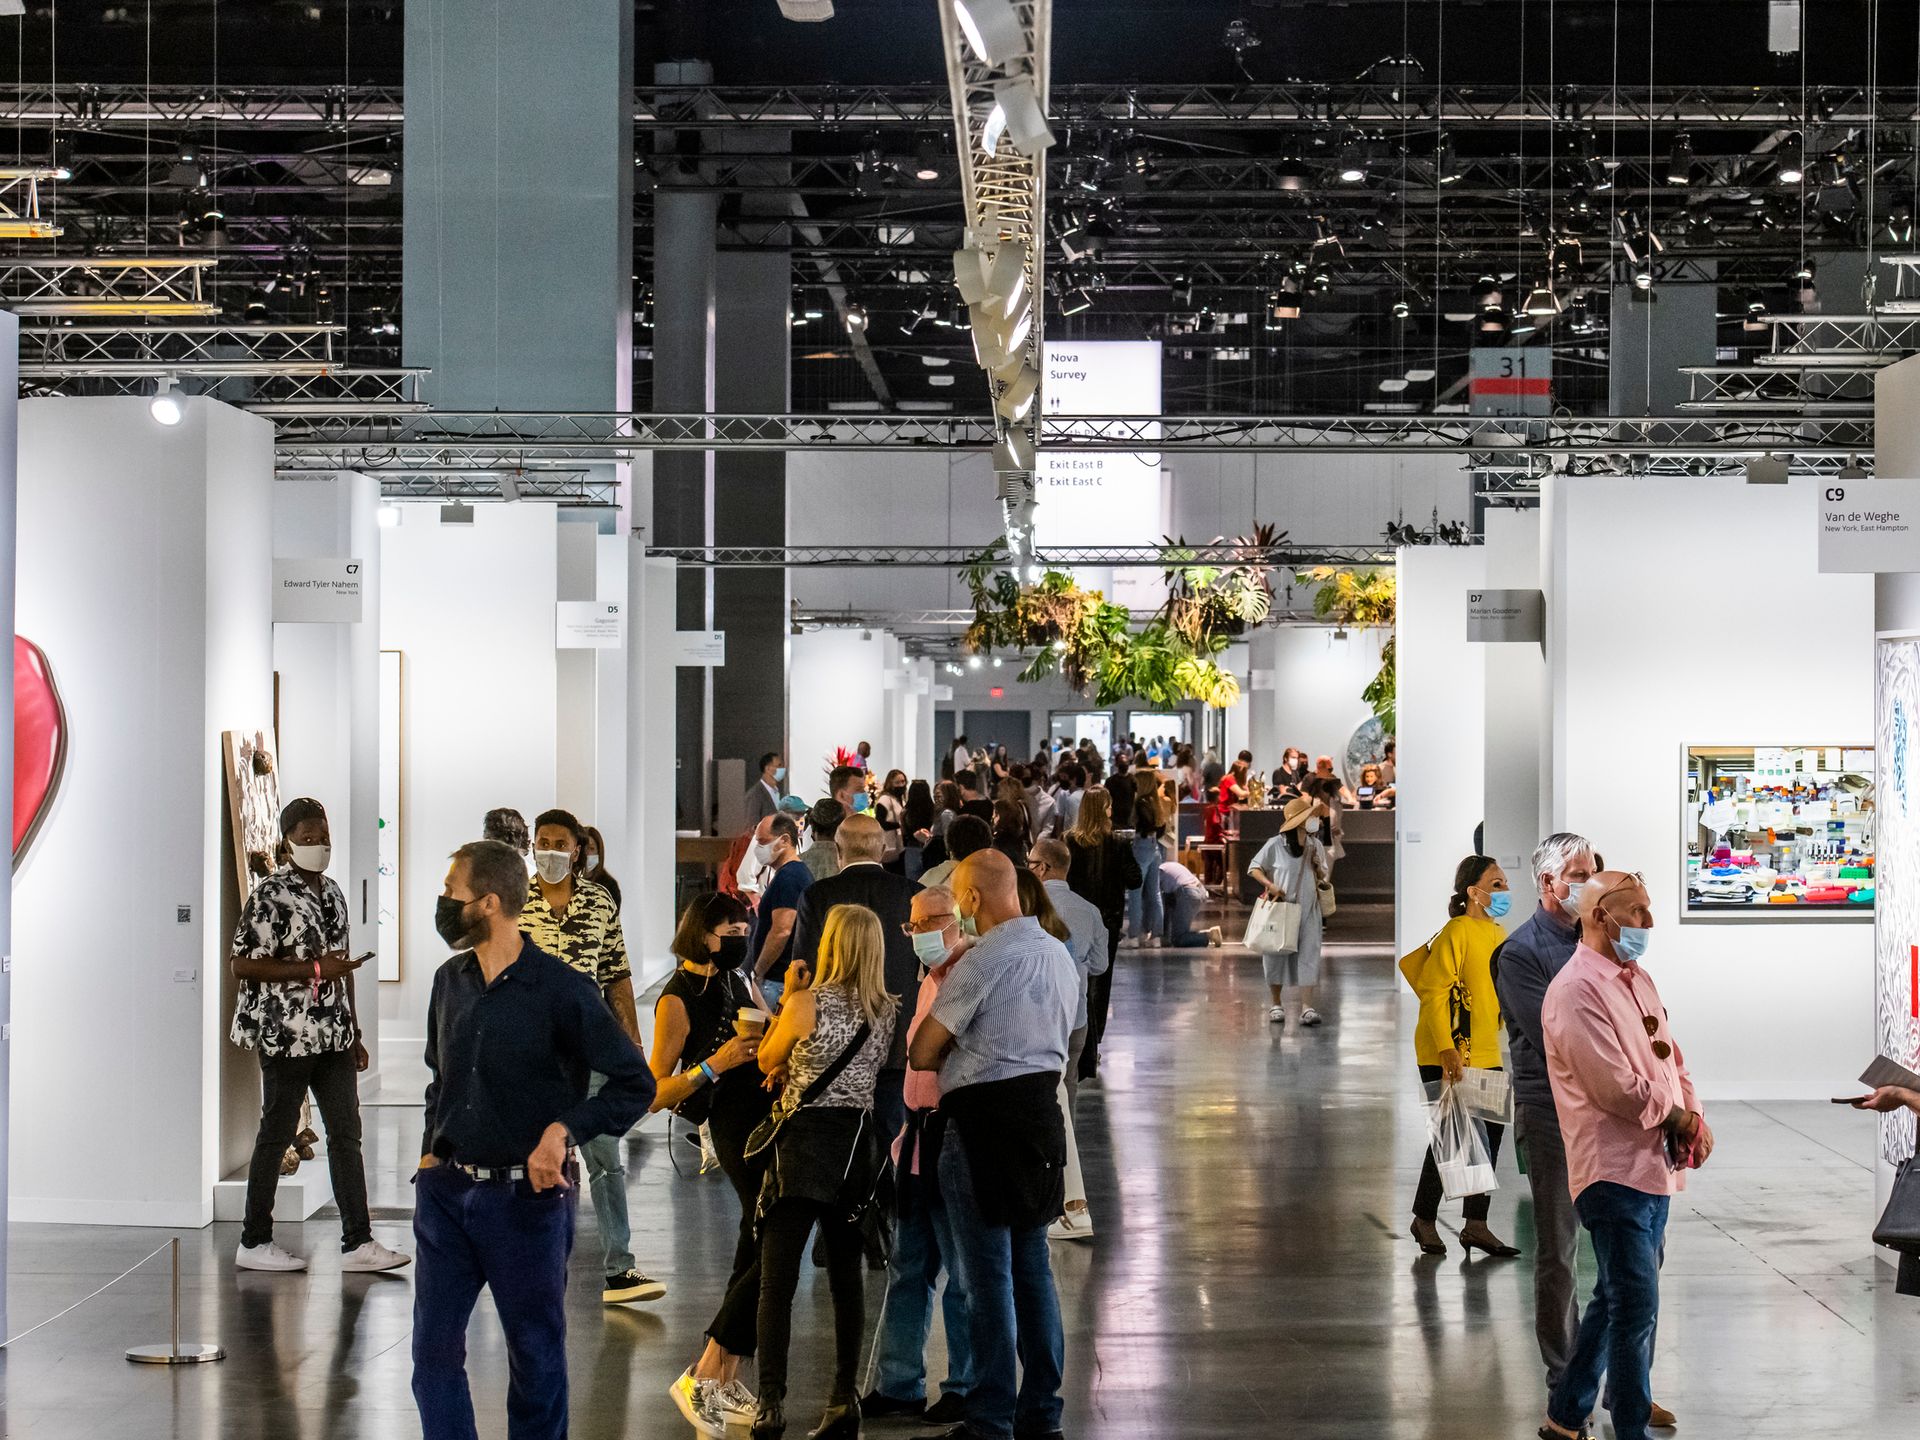 Why Is There No Spanish at Art Basel Miami?